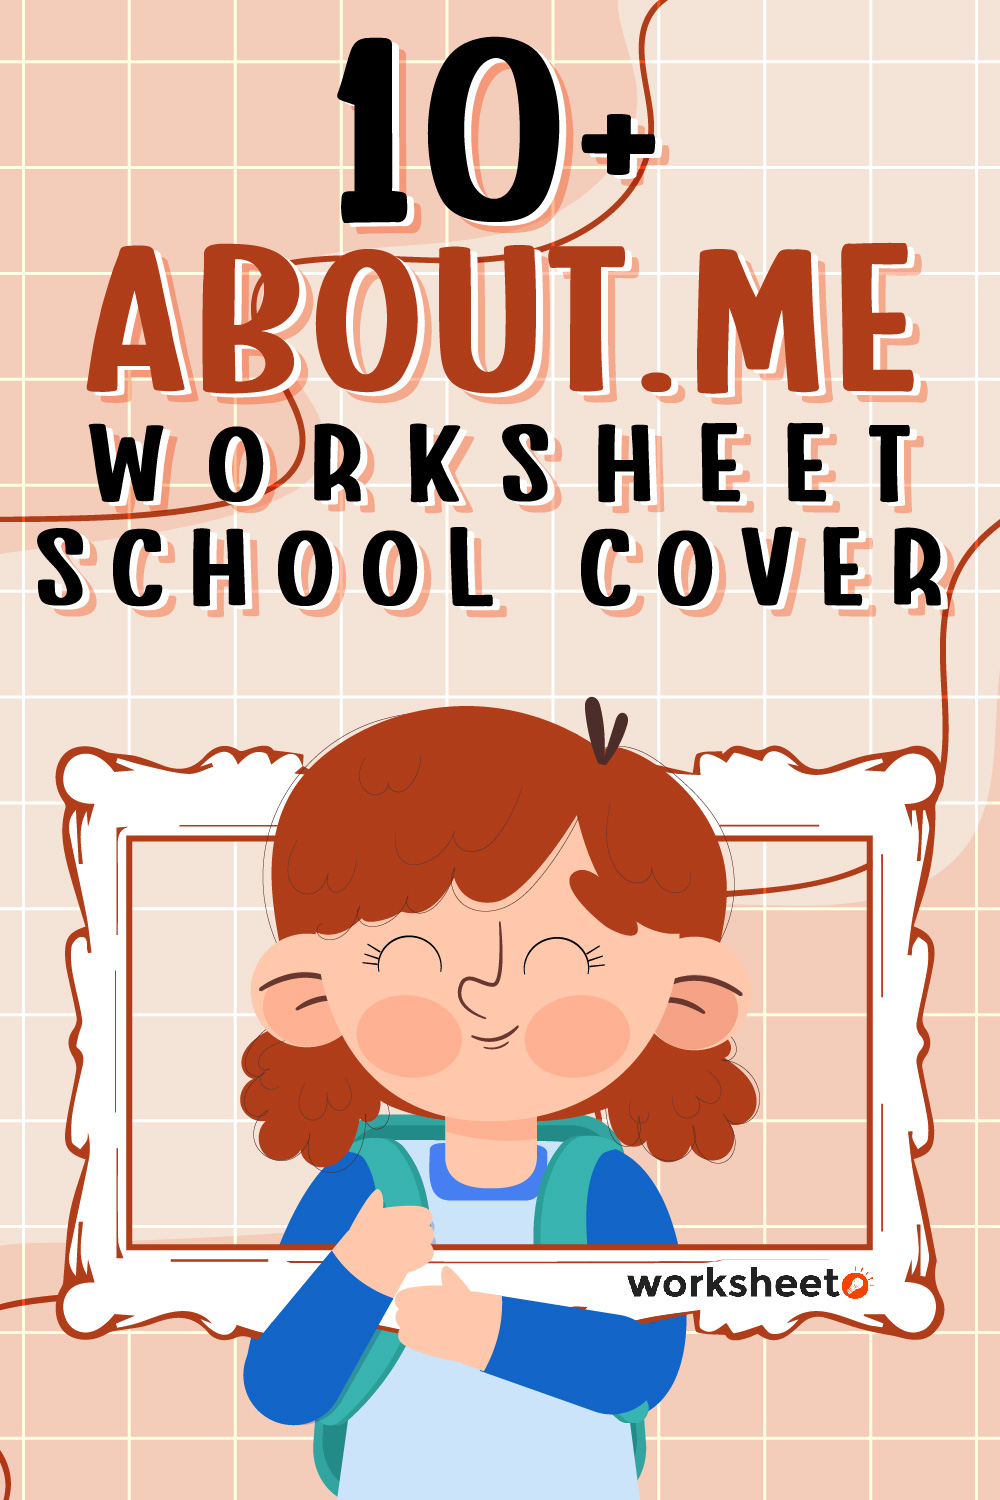 About.me Worksheet School Cover